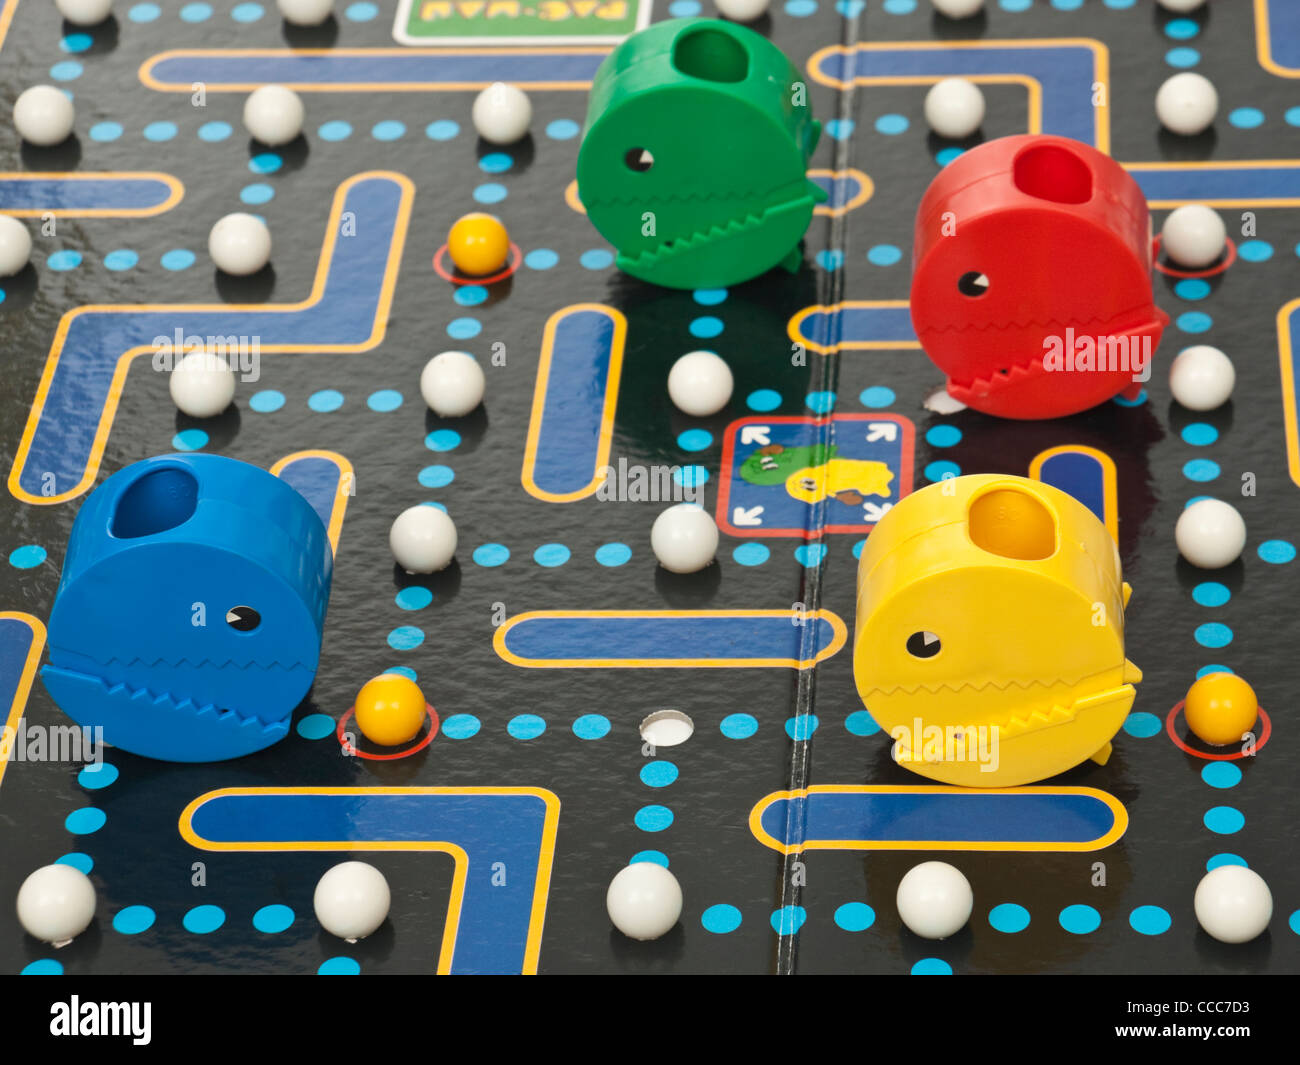 Vintage 1980's Pac-Man board game version of the classic arcade game by NAMCO Stock Photo